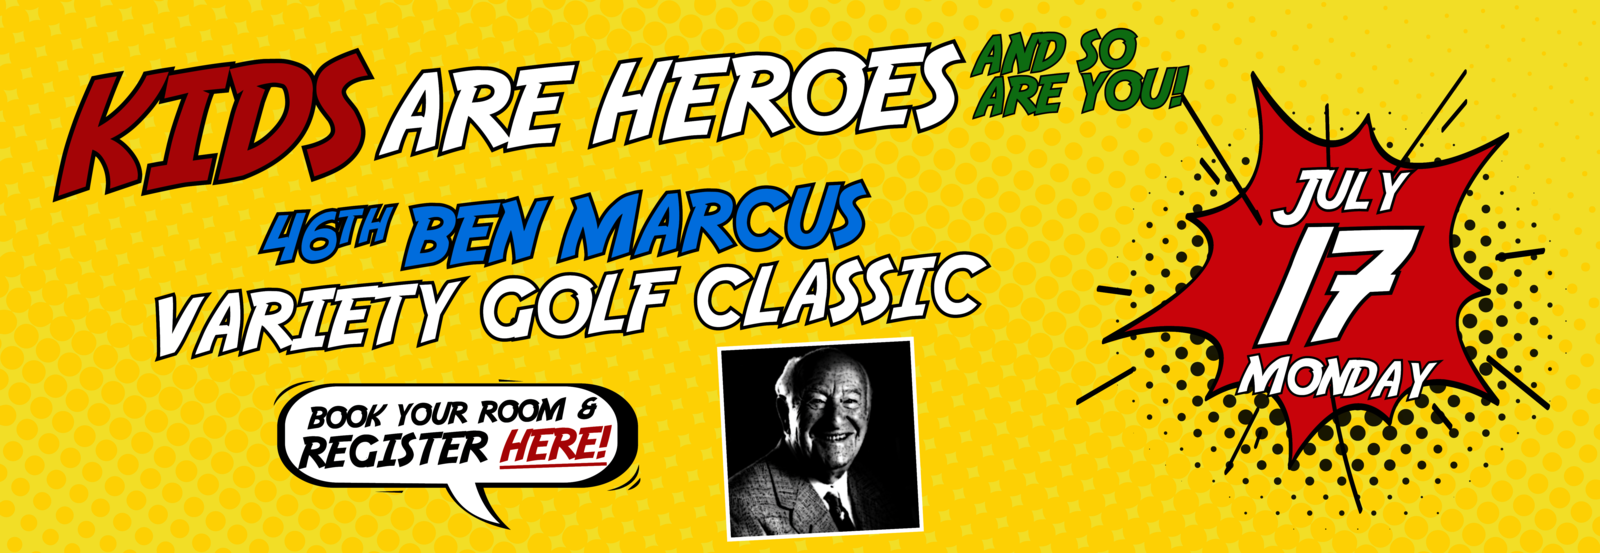 Ben Marcus Variety Golf Classic  - Variety - the Children's Charity of Wisconsin